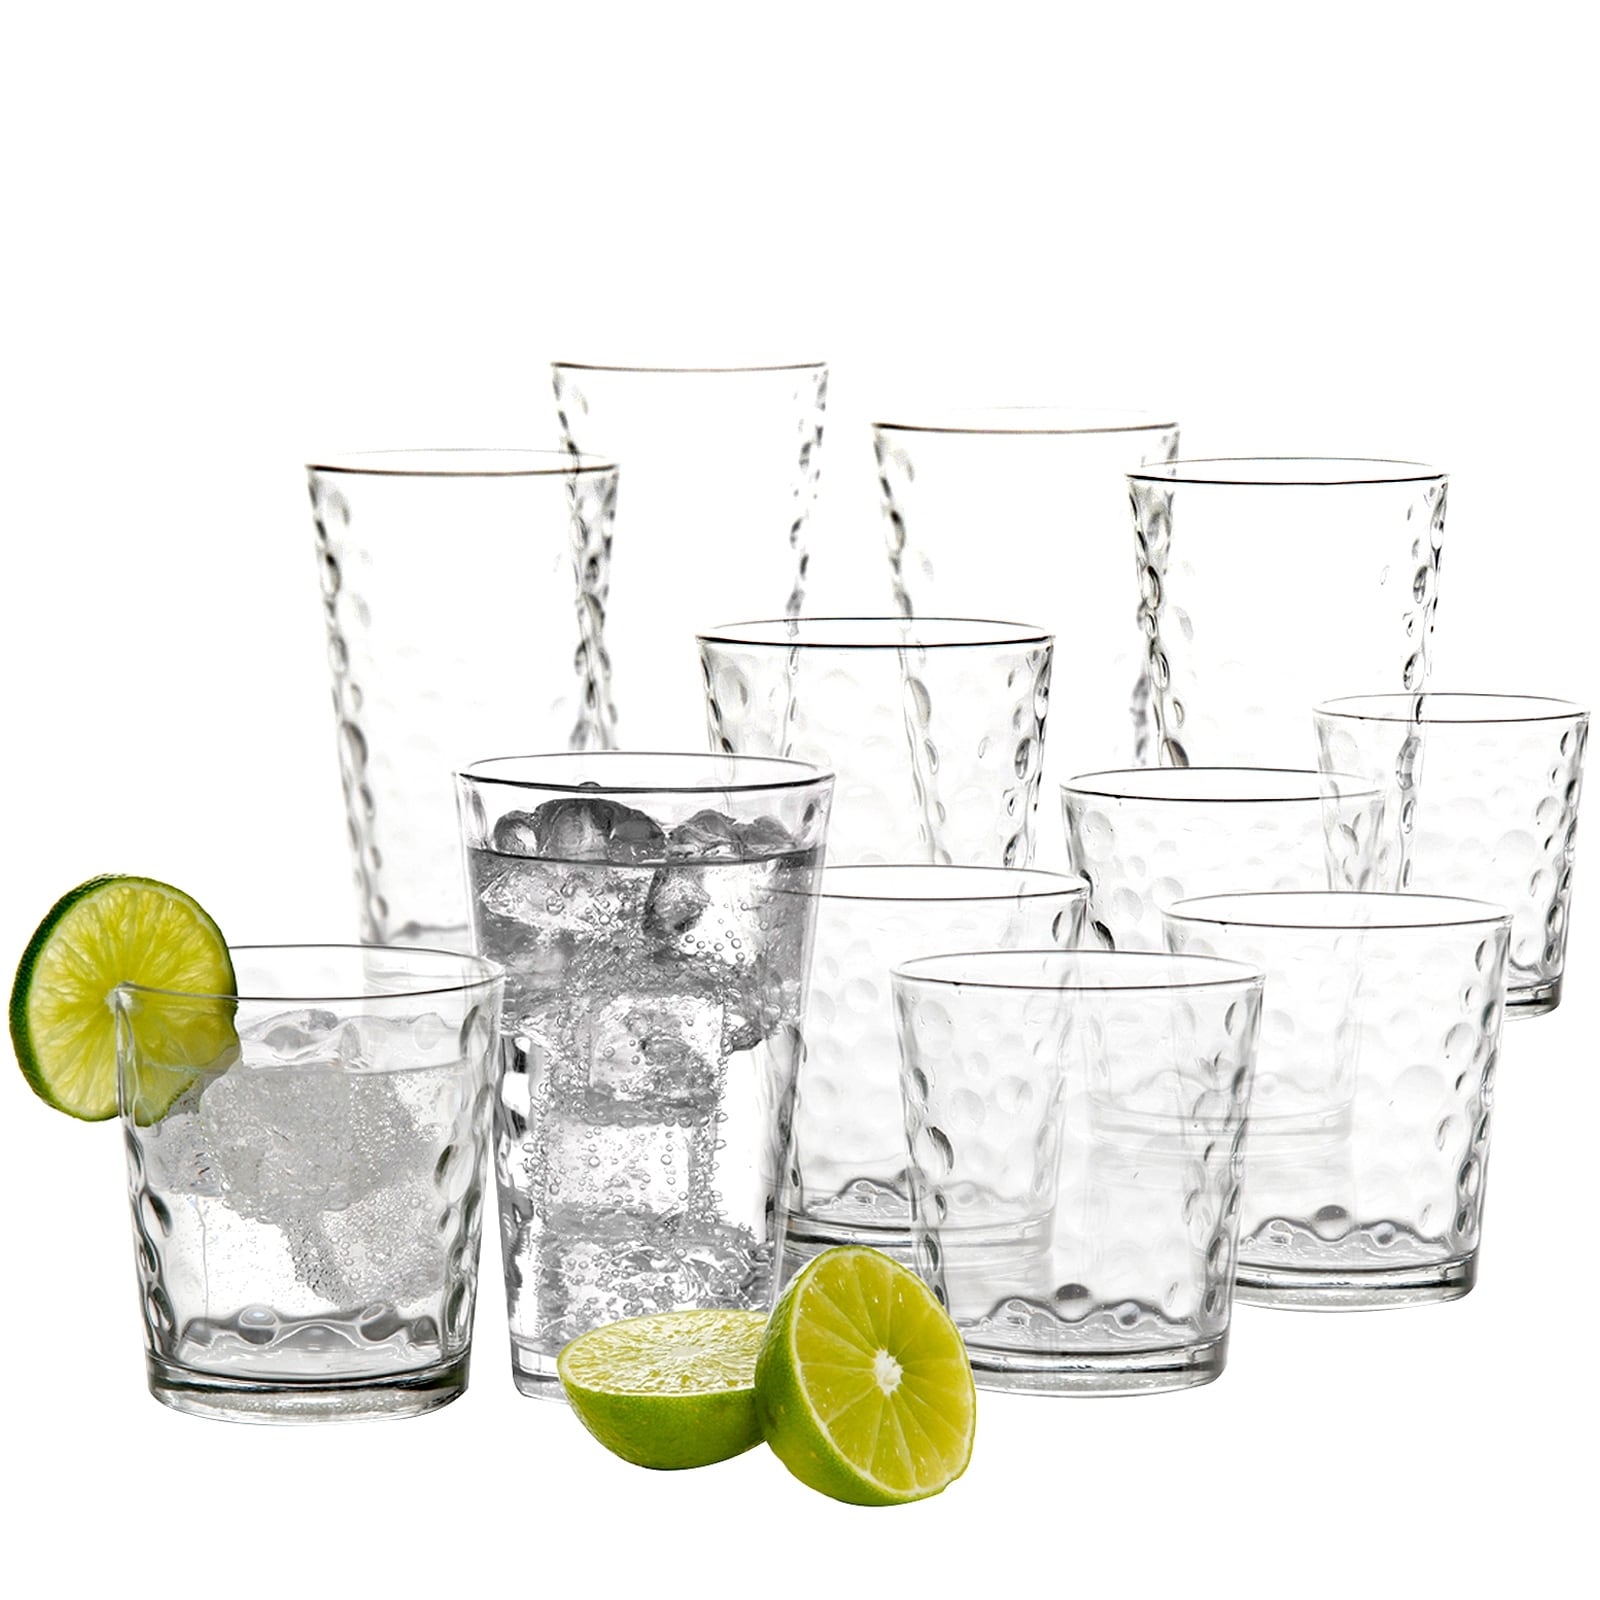 https://ak1.ostkcdn.com/images/products/is/images/direct/73972a94db35f6f6abbd4a6d07a9162aa783663e/Gibson-Home-Great-Foundations-16-Piece-Tumbler-and-Double-Old-Fashioned-Glass-Set-in-Bubble-Pattern.jpg